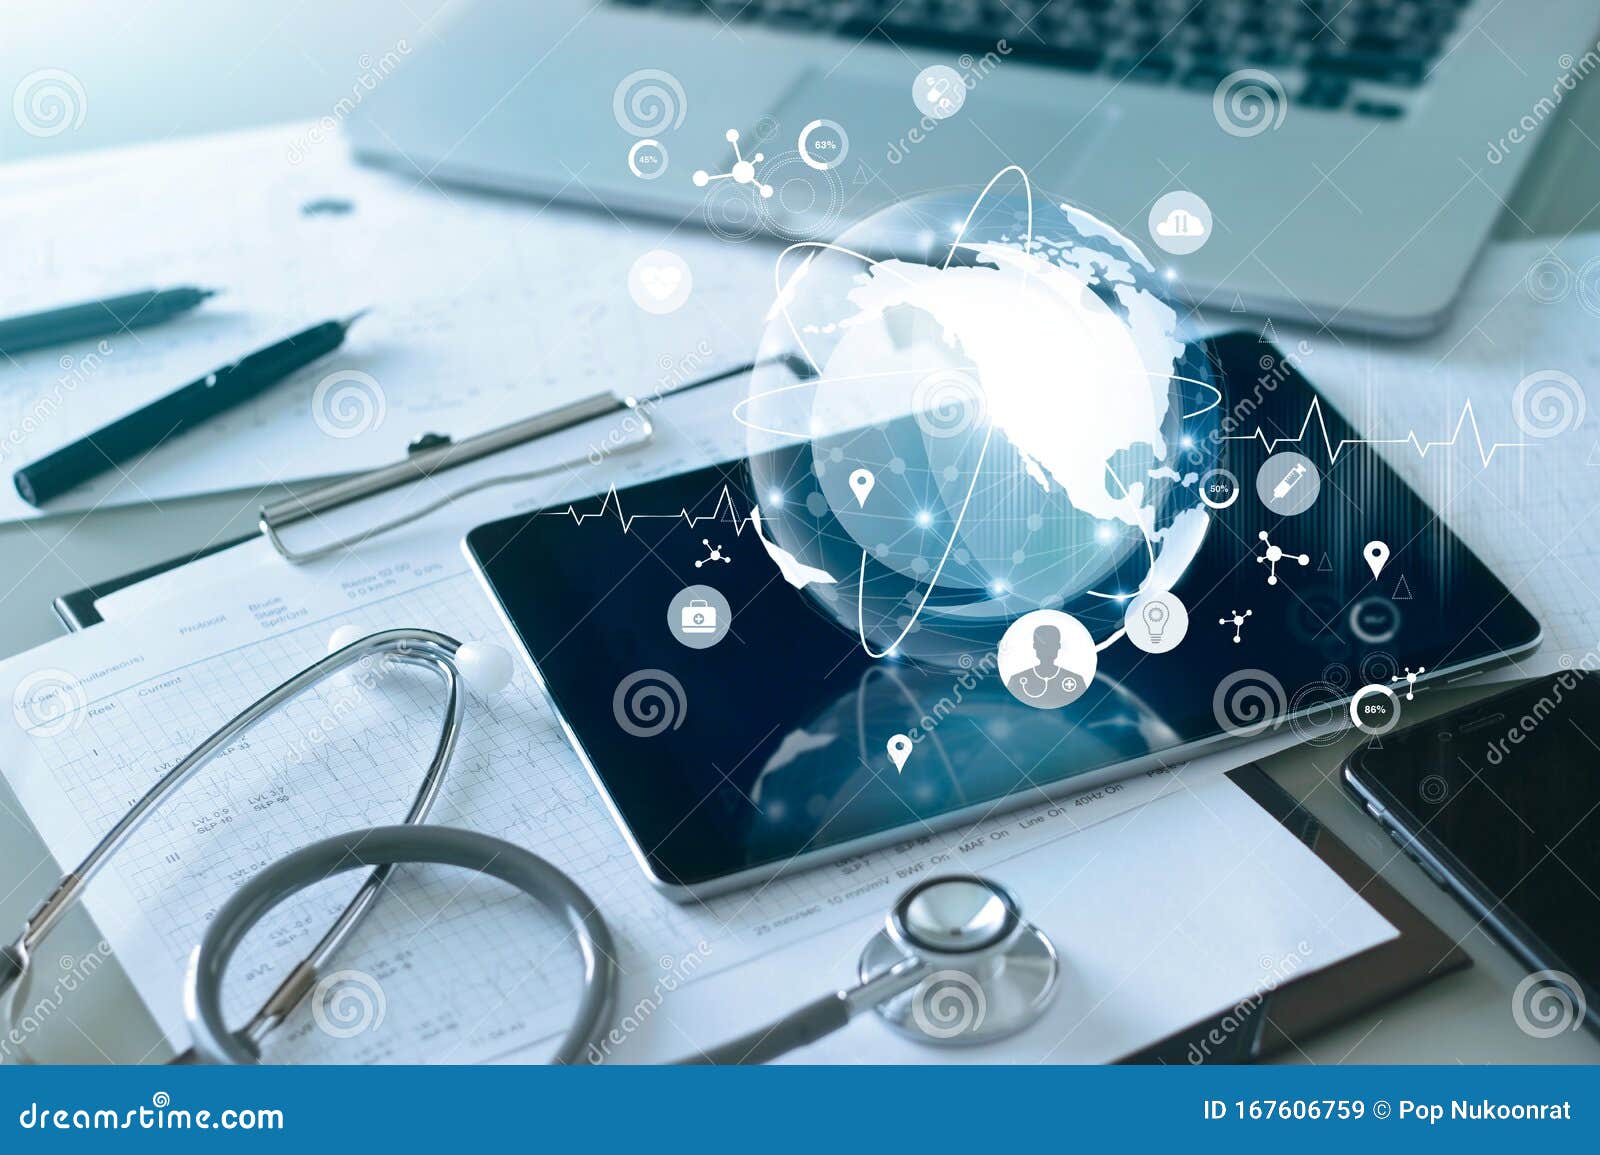 medical global networking and healthcare global network connection on tablet, medical technology